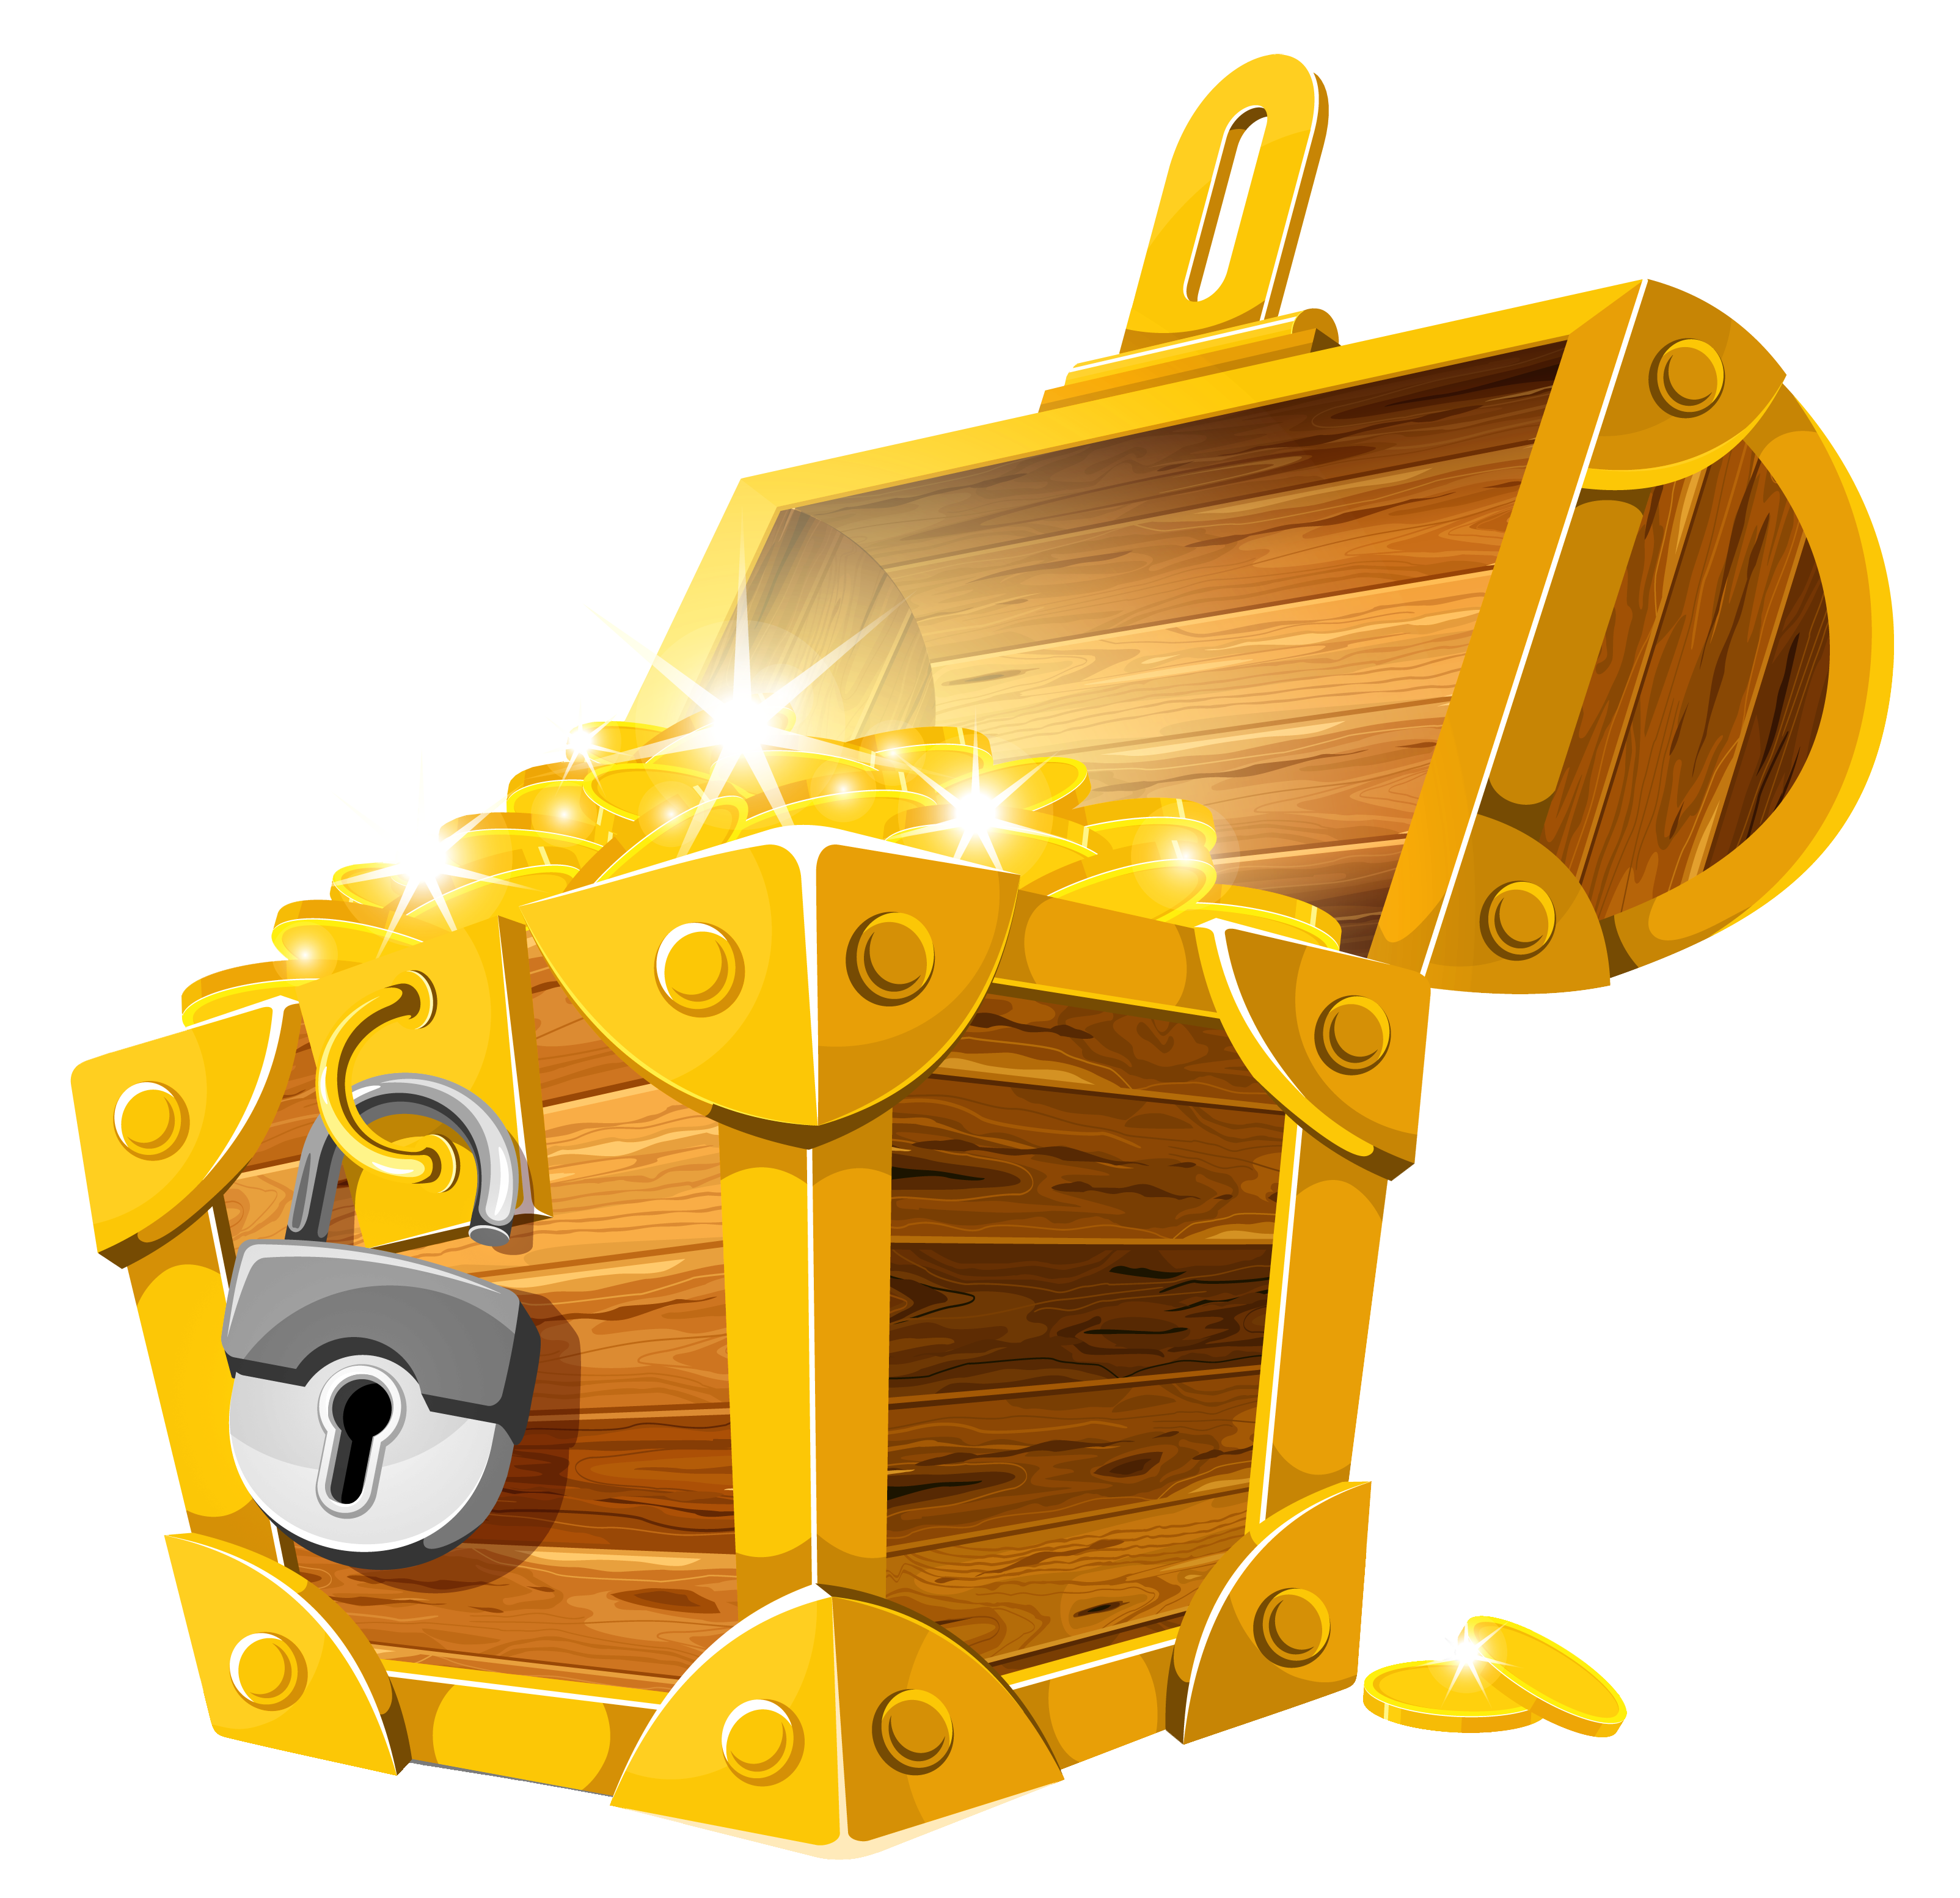 Pirate Treasure Chest Clip Art Pluspng 2 - Pirate Treasure Chest, Transparent background PNG HD thumbnail